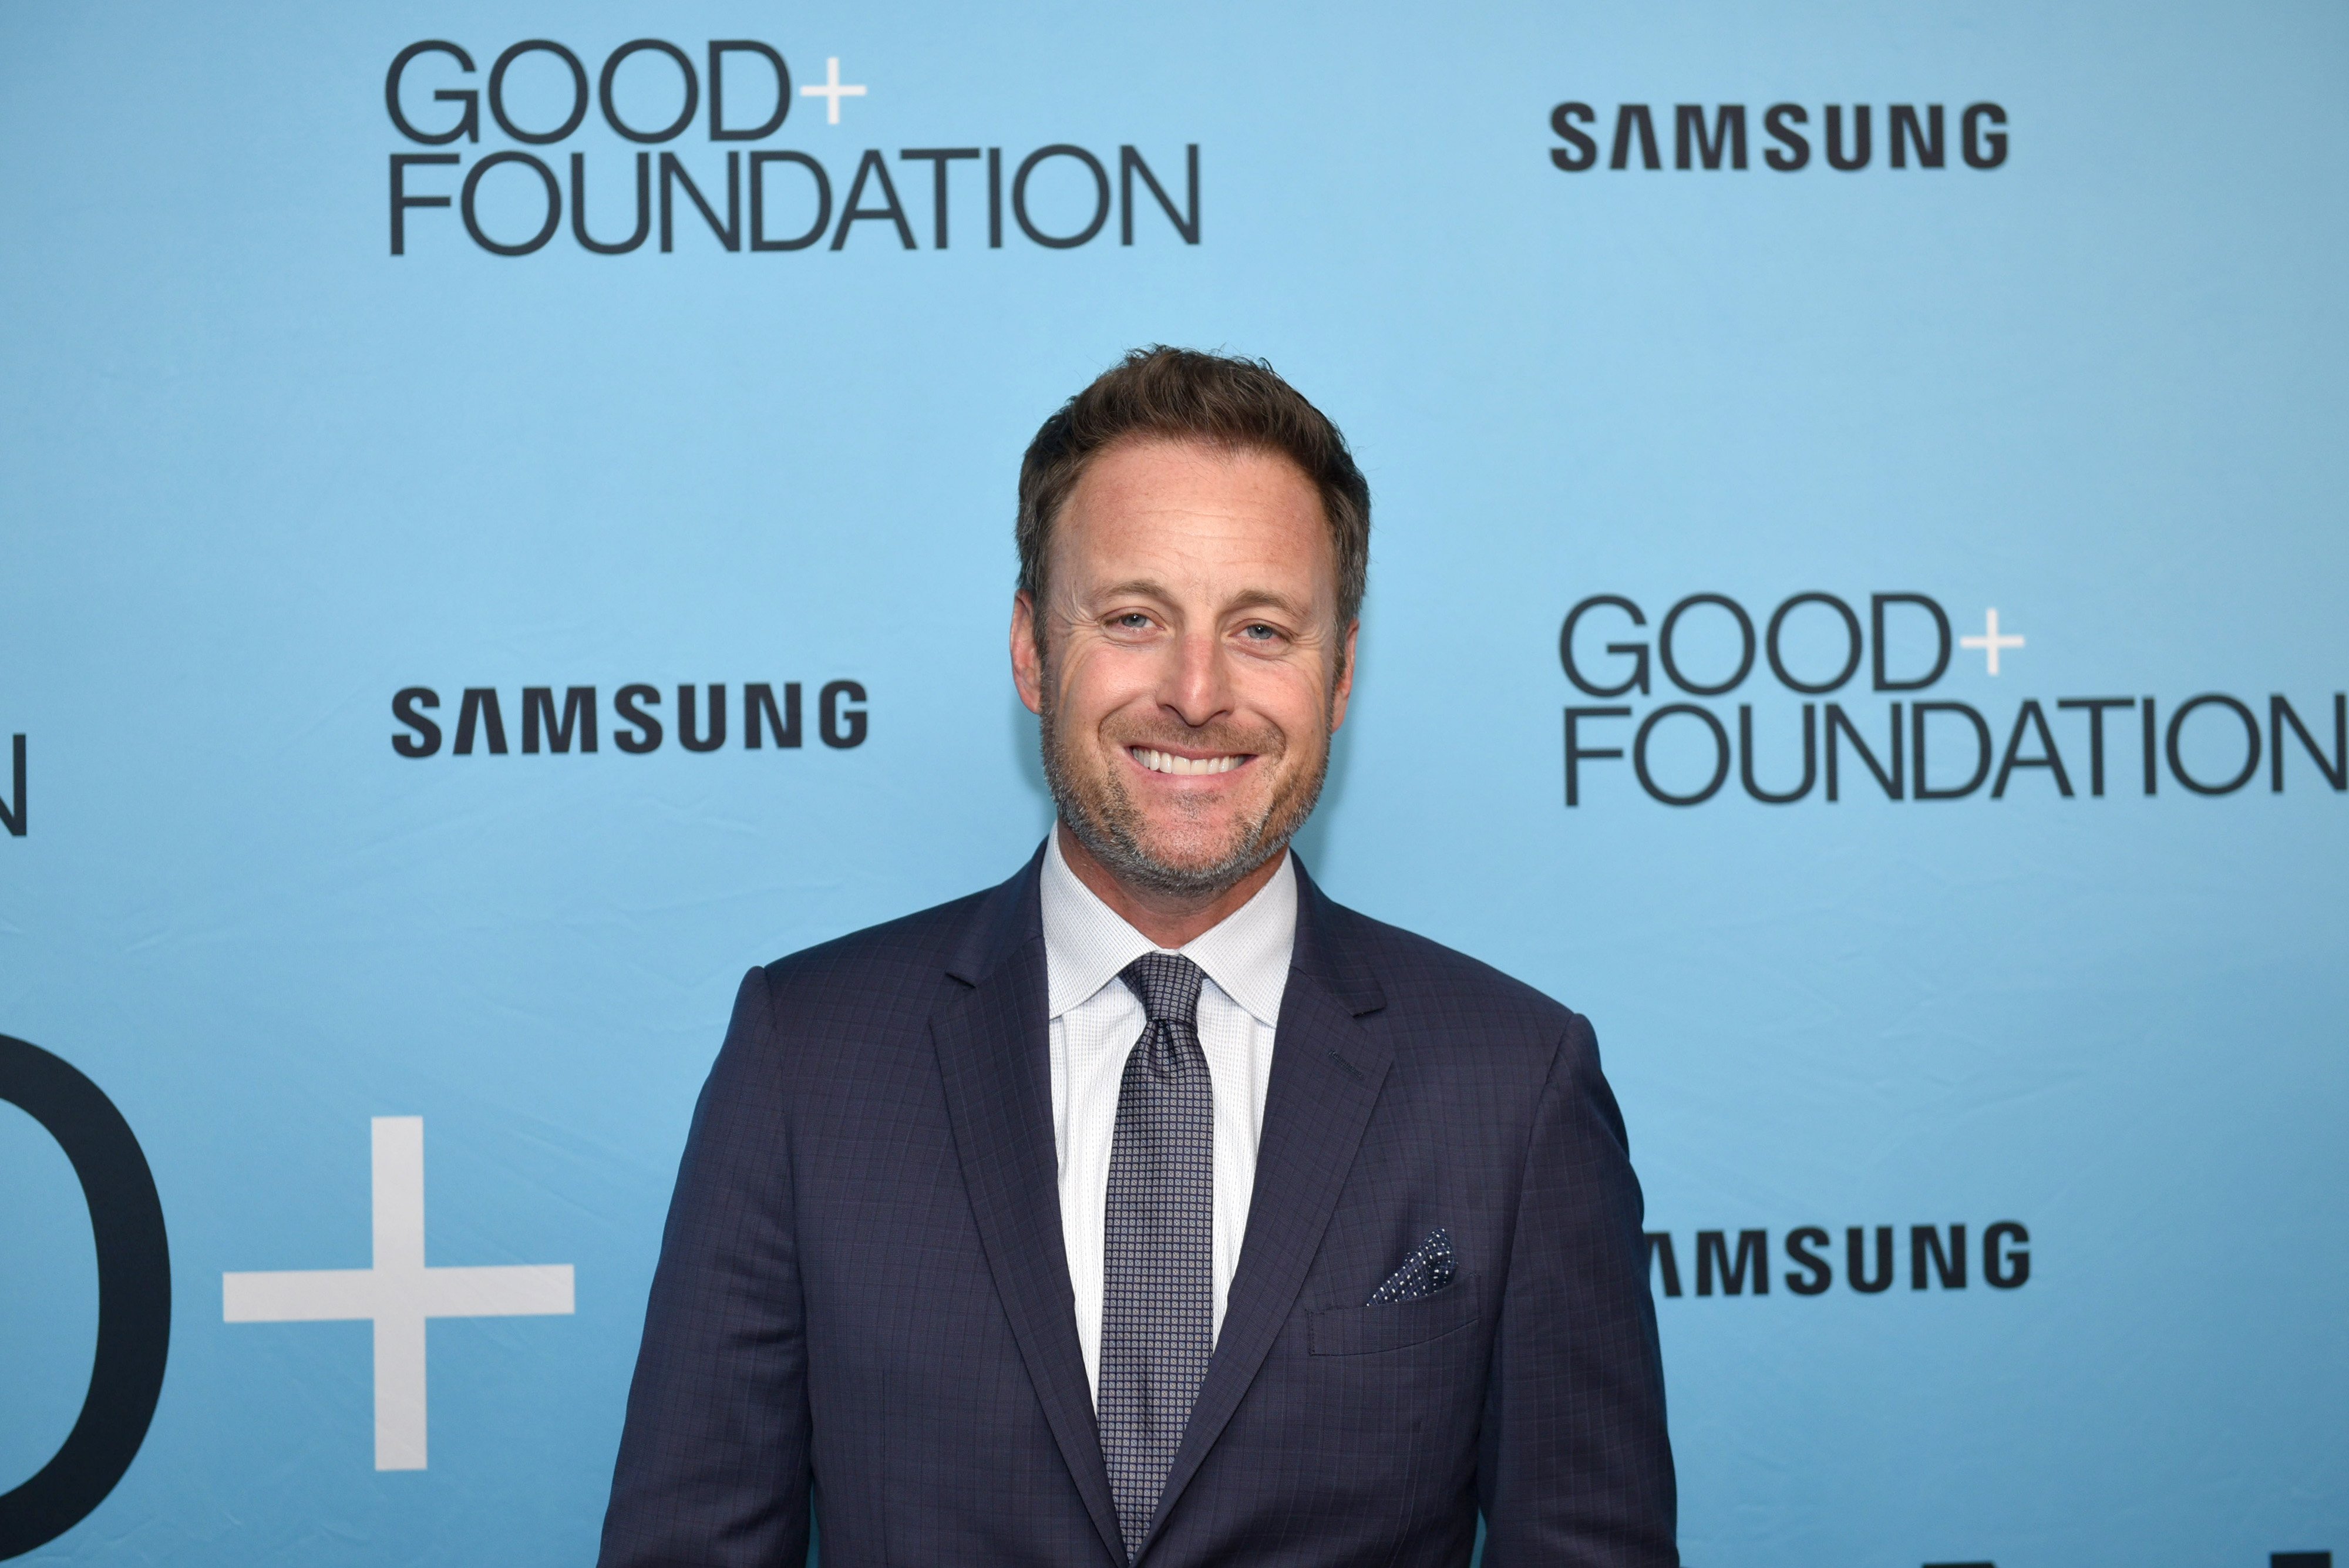 Chris Harrison attends the GOOD+ Foundations Evening of Comedy + Music Benefit on September 12, 2018, in New York City. | Source: Getty Images.